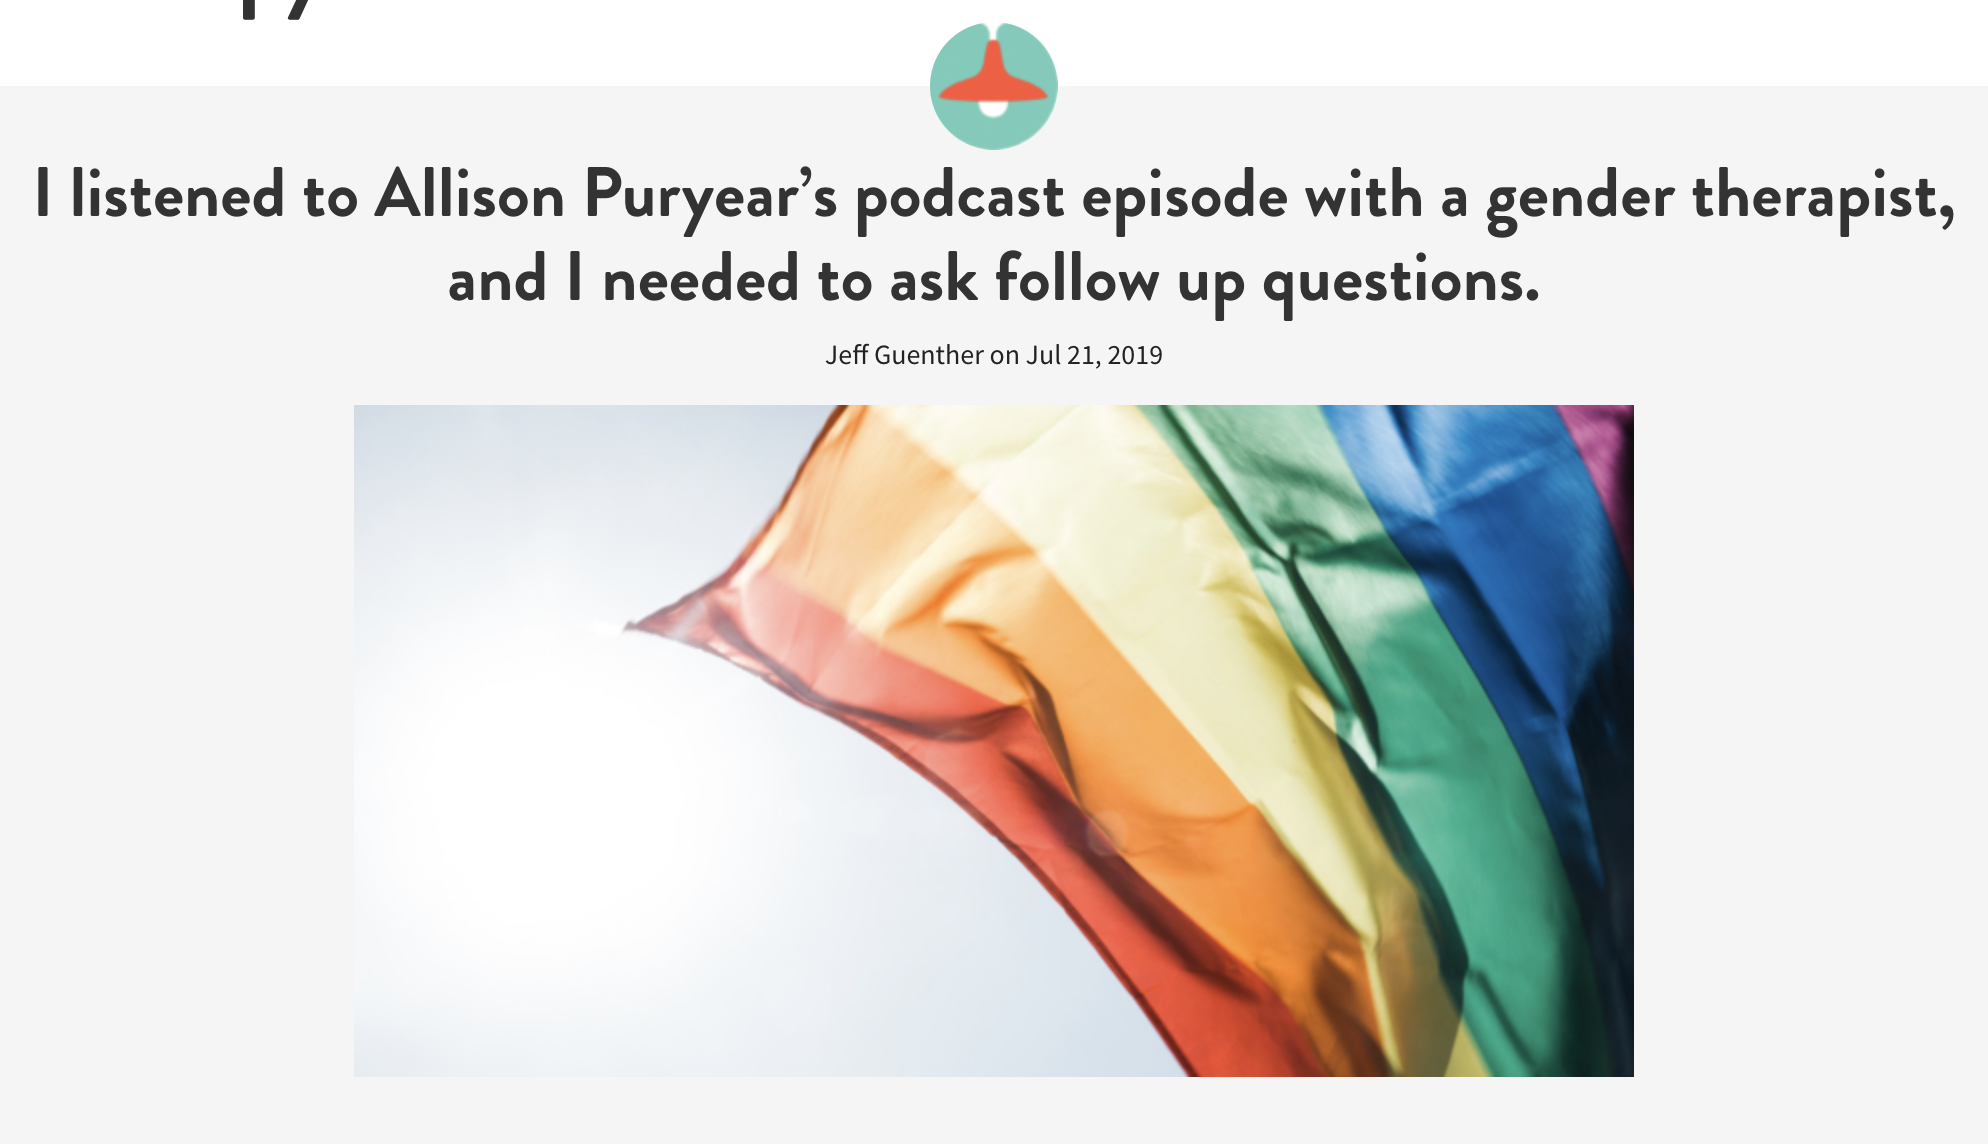 I listened to Allison Puryear's excellent podcast...